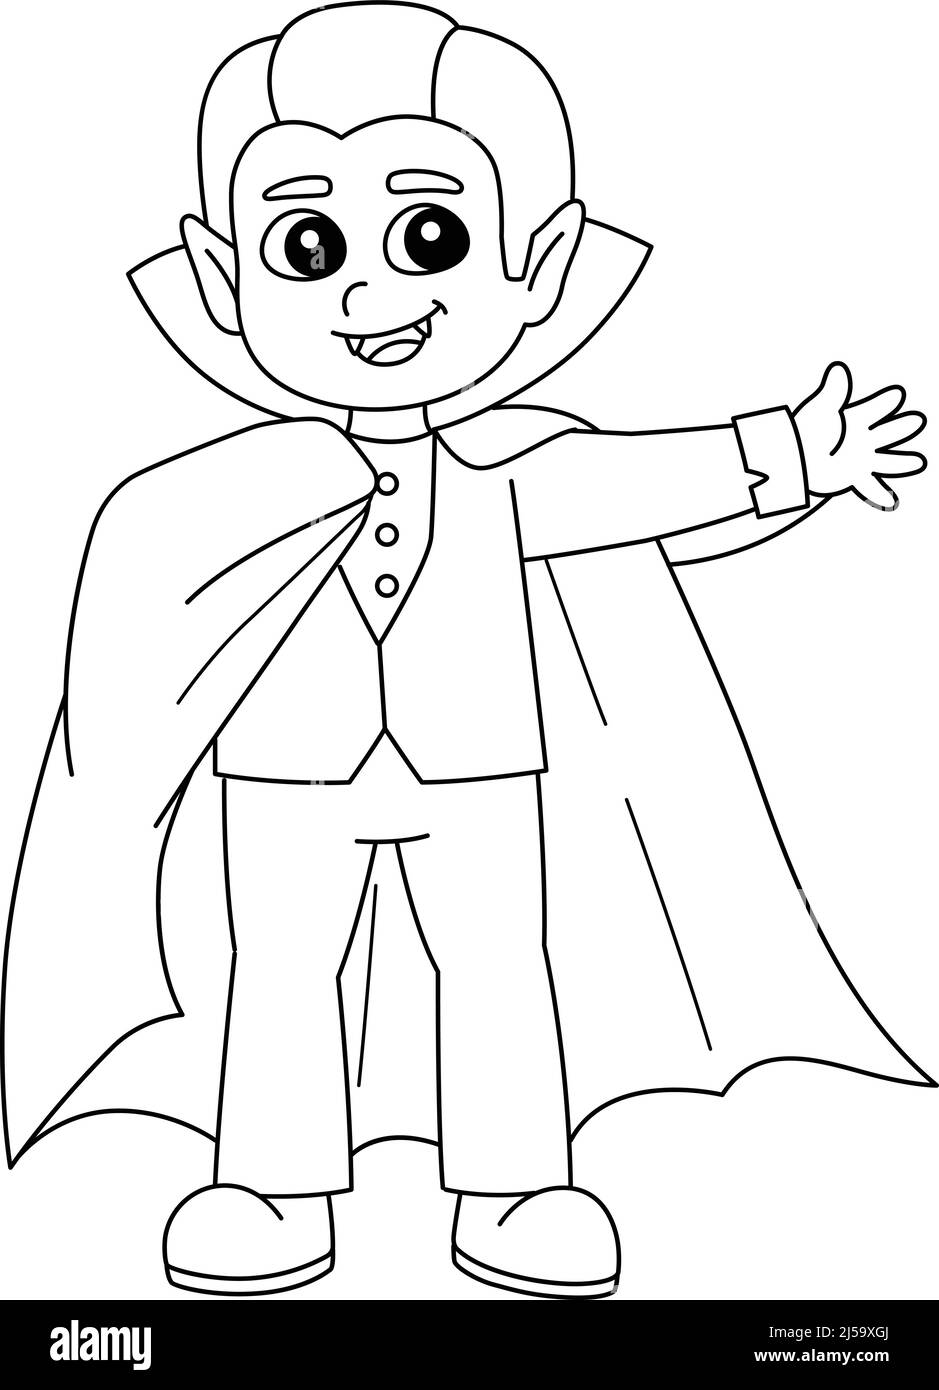 Vampire Halloween Coloring Page Isolated for Kids Stock Vector